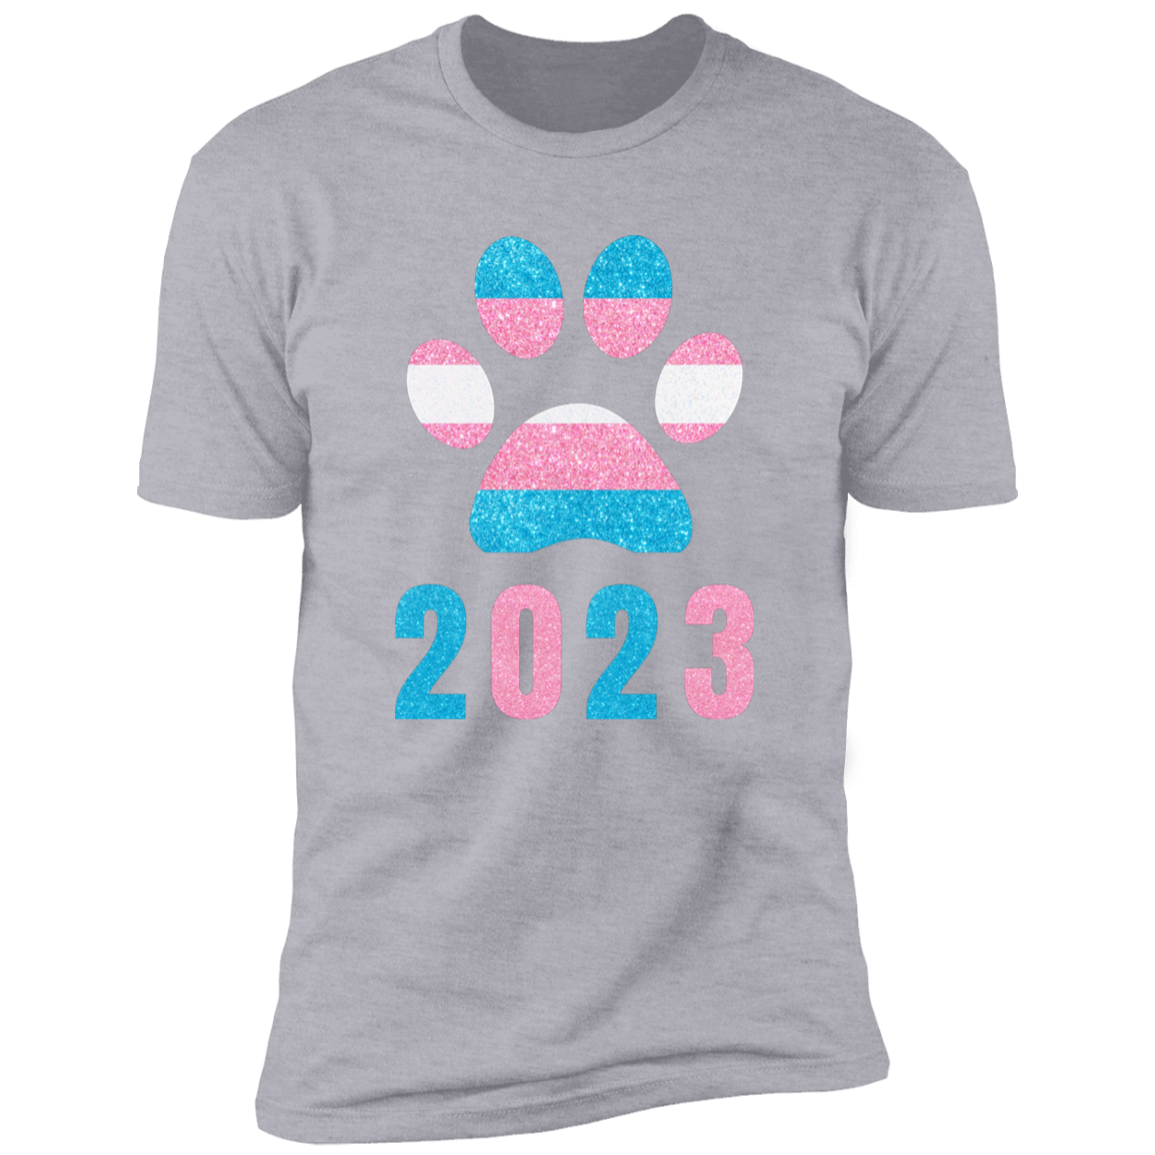 Dog Paw Trans Pride 2023 t-shirt, dog trans pride dog shirt for humans, in light heather gray